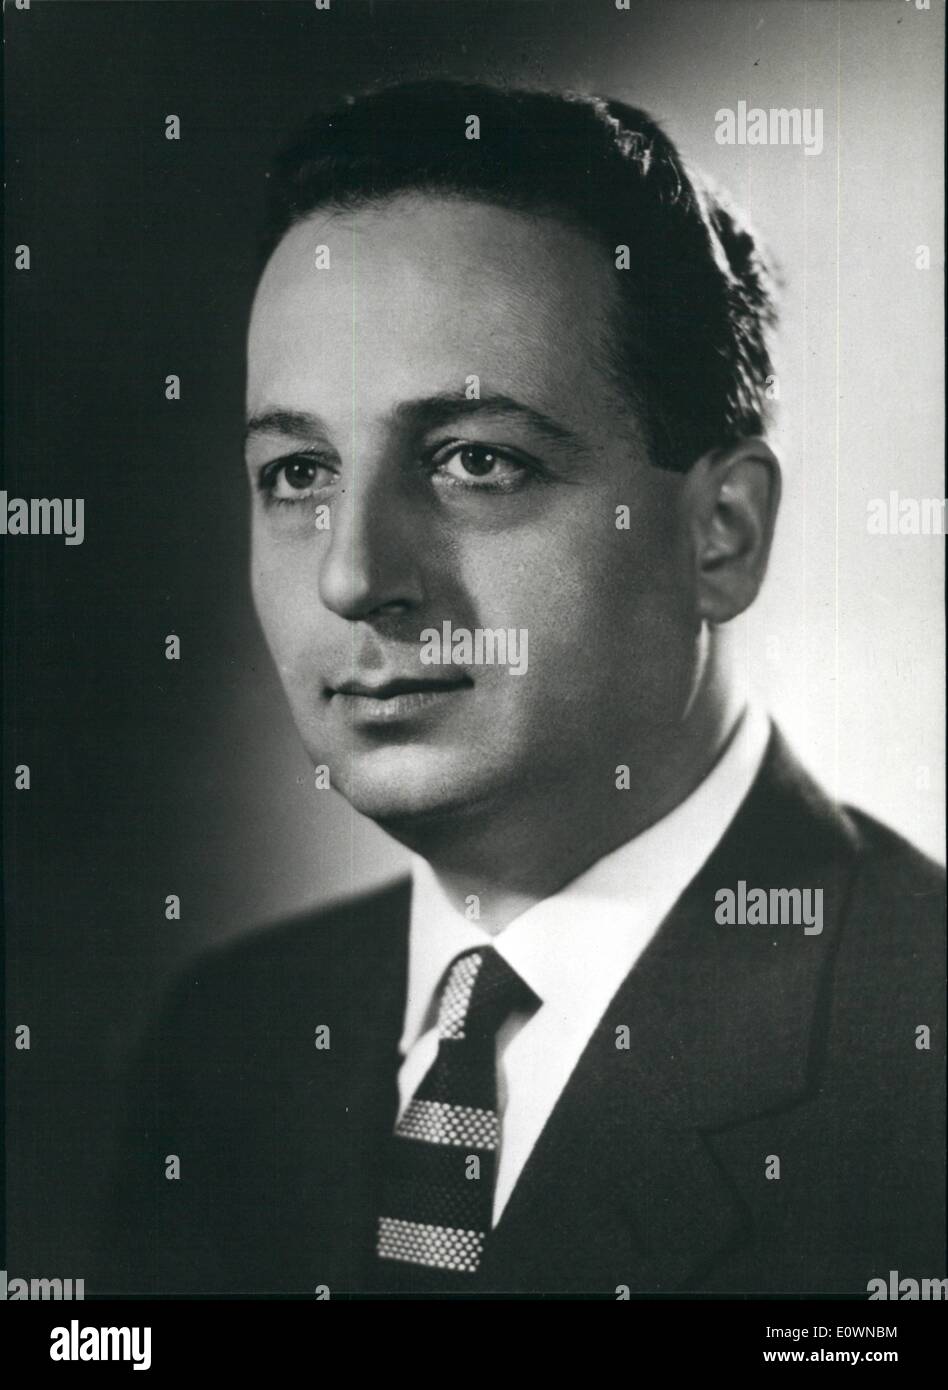 Oct. 10, 1963 - on. Giacomo Sedati Secretary of Agriculture Ministry, has been appointed by italian Ministers Council as High Commissary at direction and co-ordination to the zones near Bellune destroyed by dike disaster. Photo shows on.Giacomo Sedati in a recent portrait. Stock Photo